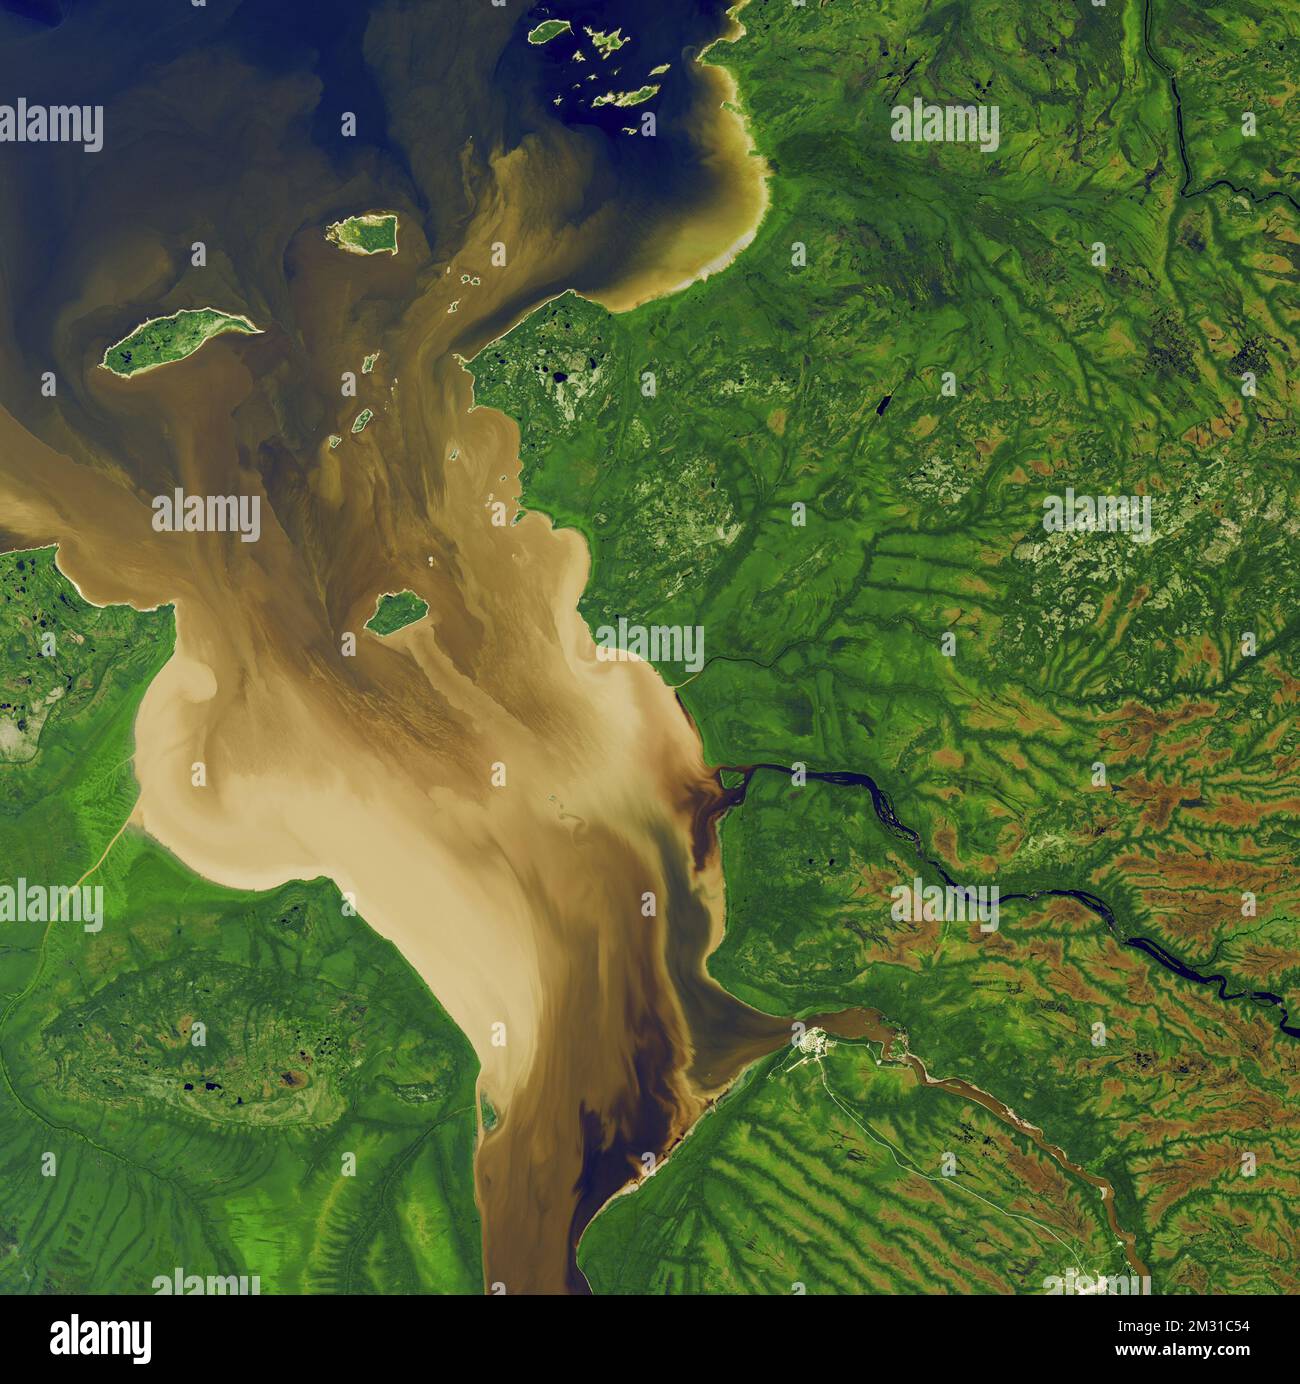 Rupert Bay, an arm of James Bay, extends into Quebec, Canada. Many rivers carry sediment into the bay and combine with seawater coming in from the tide. A prominent sediment stream extends past Stag Island and a vortex curls off Stag Rock in the middle of the bay. Sediment trails off the islands toward the mainland, indicating the tide was coming in at the time of image acquisition on 30 July 2016. An optimised version of a Landsat 8 / USGS. Credit: NASA/USGS Stock Photo